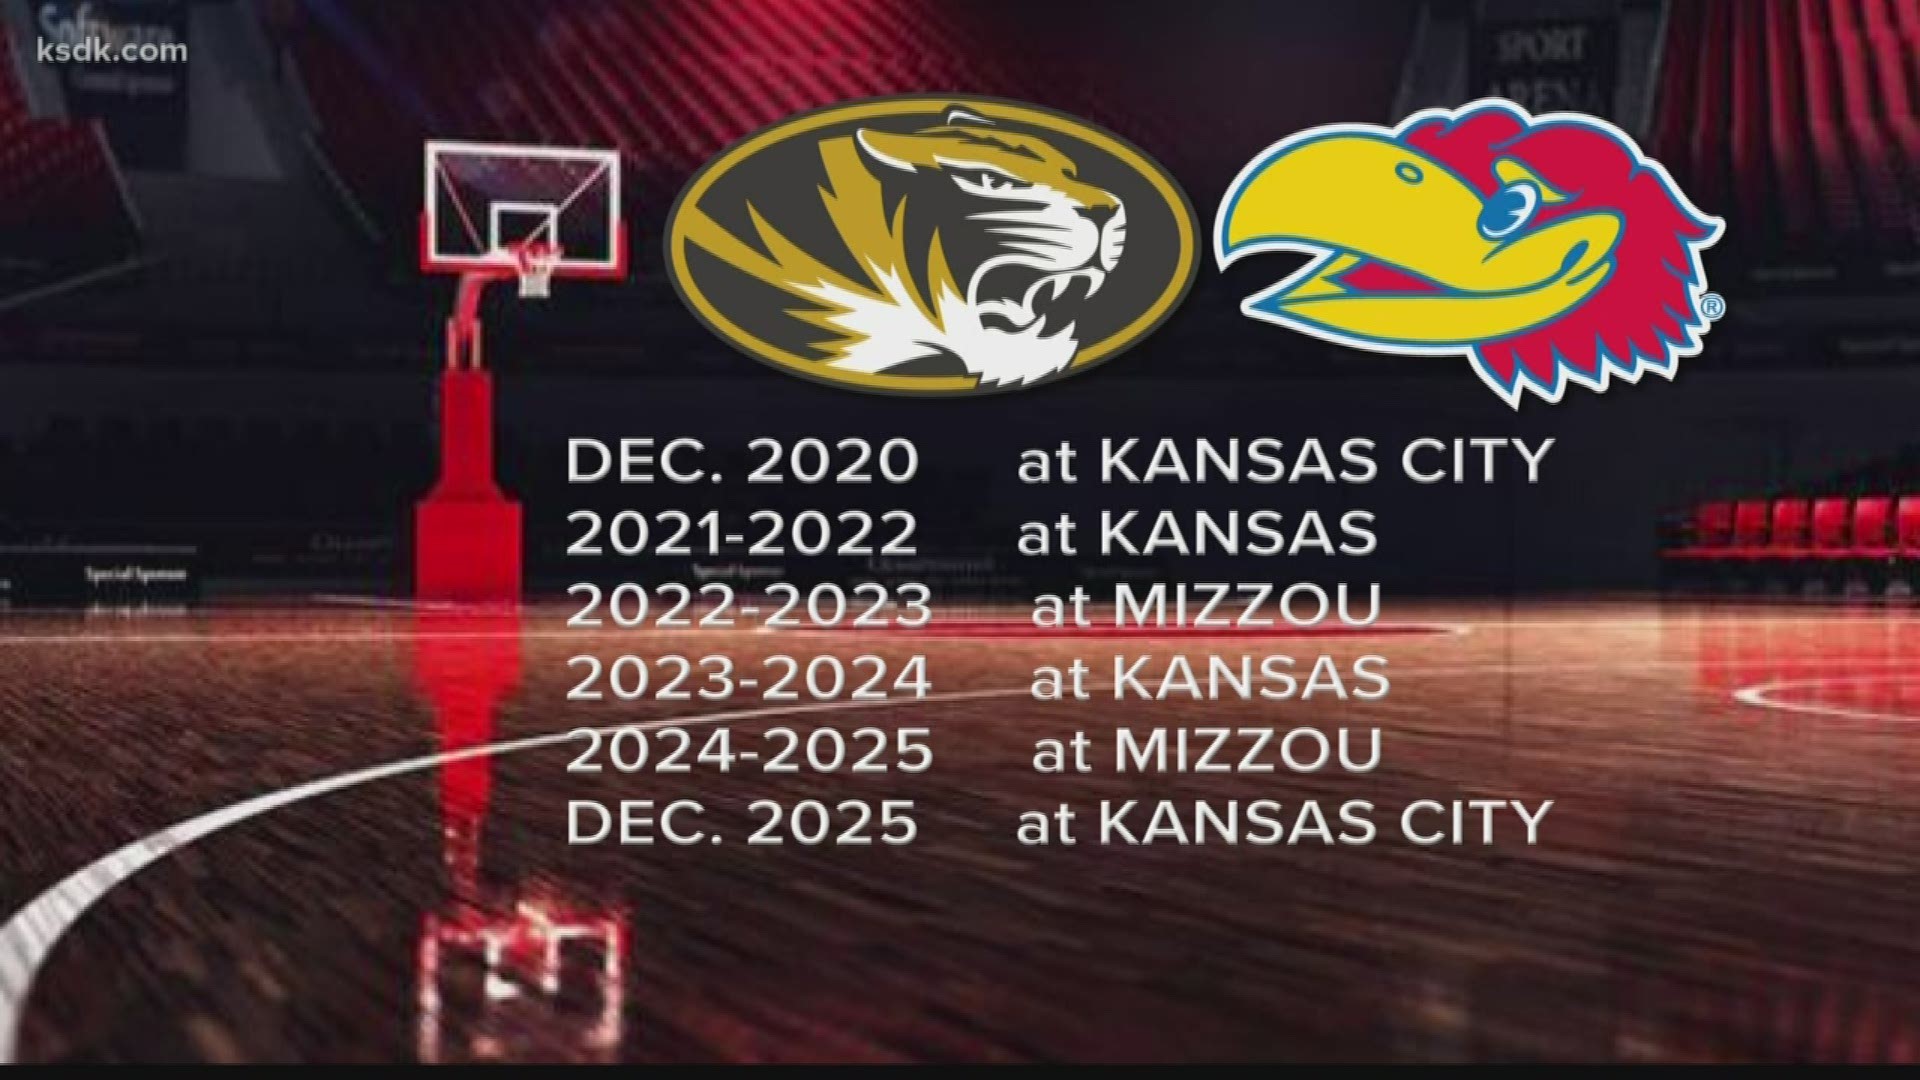 The teams will play six times starting in December of 2020.